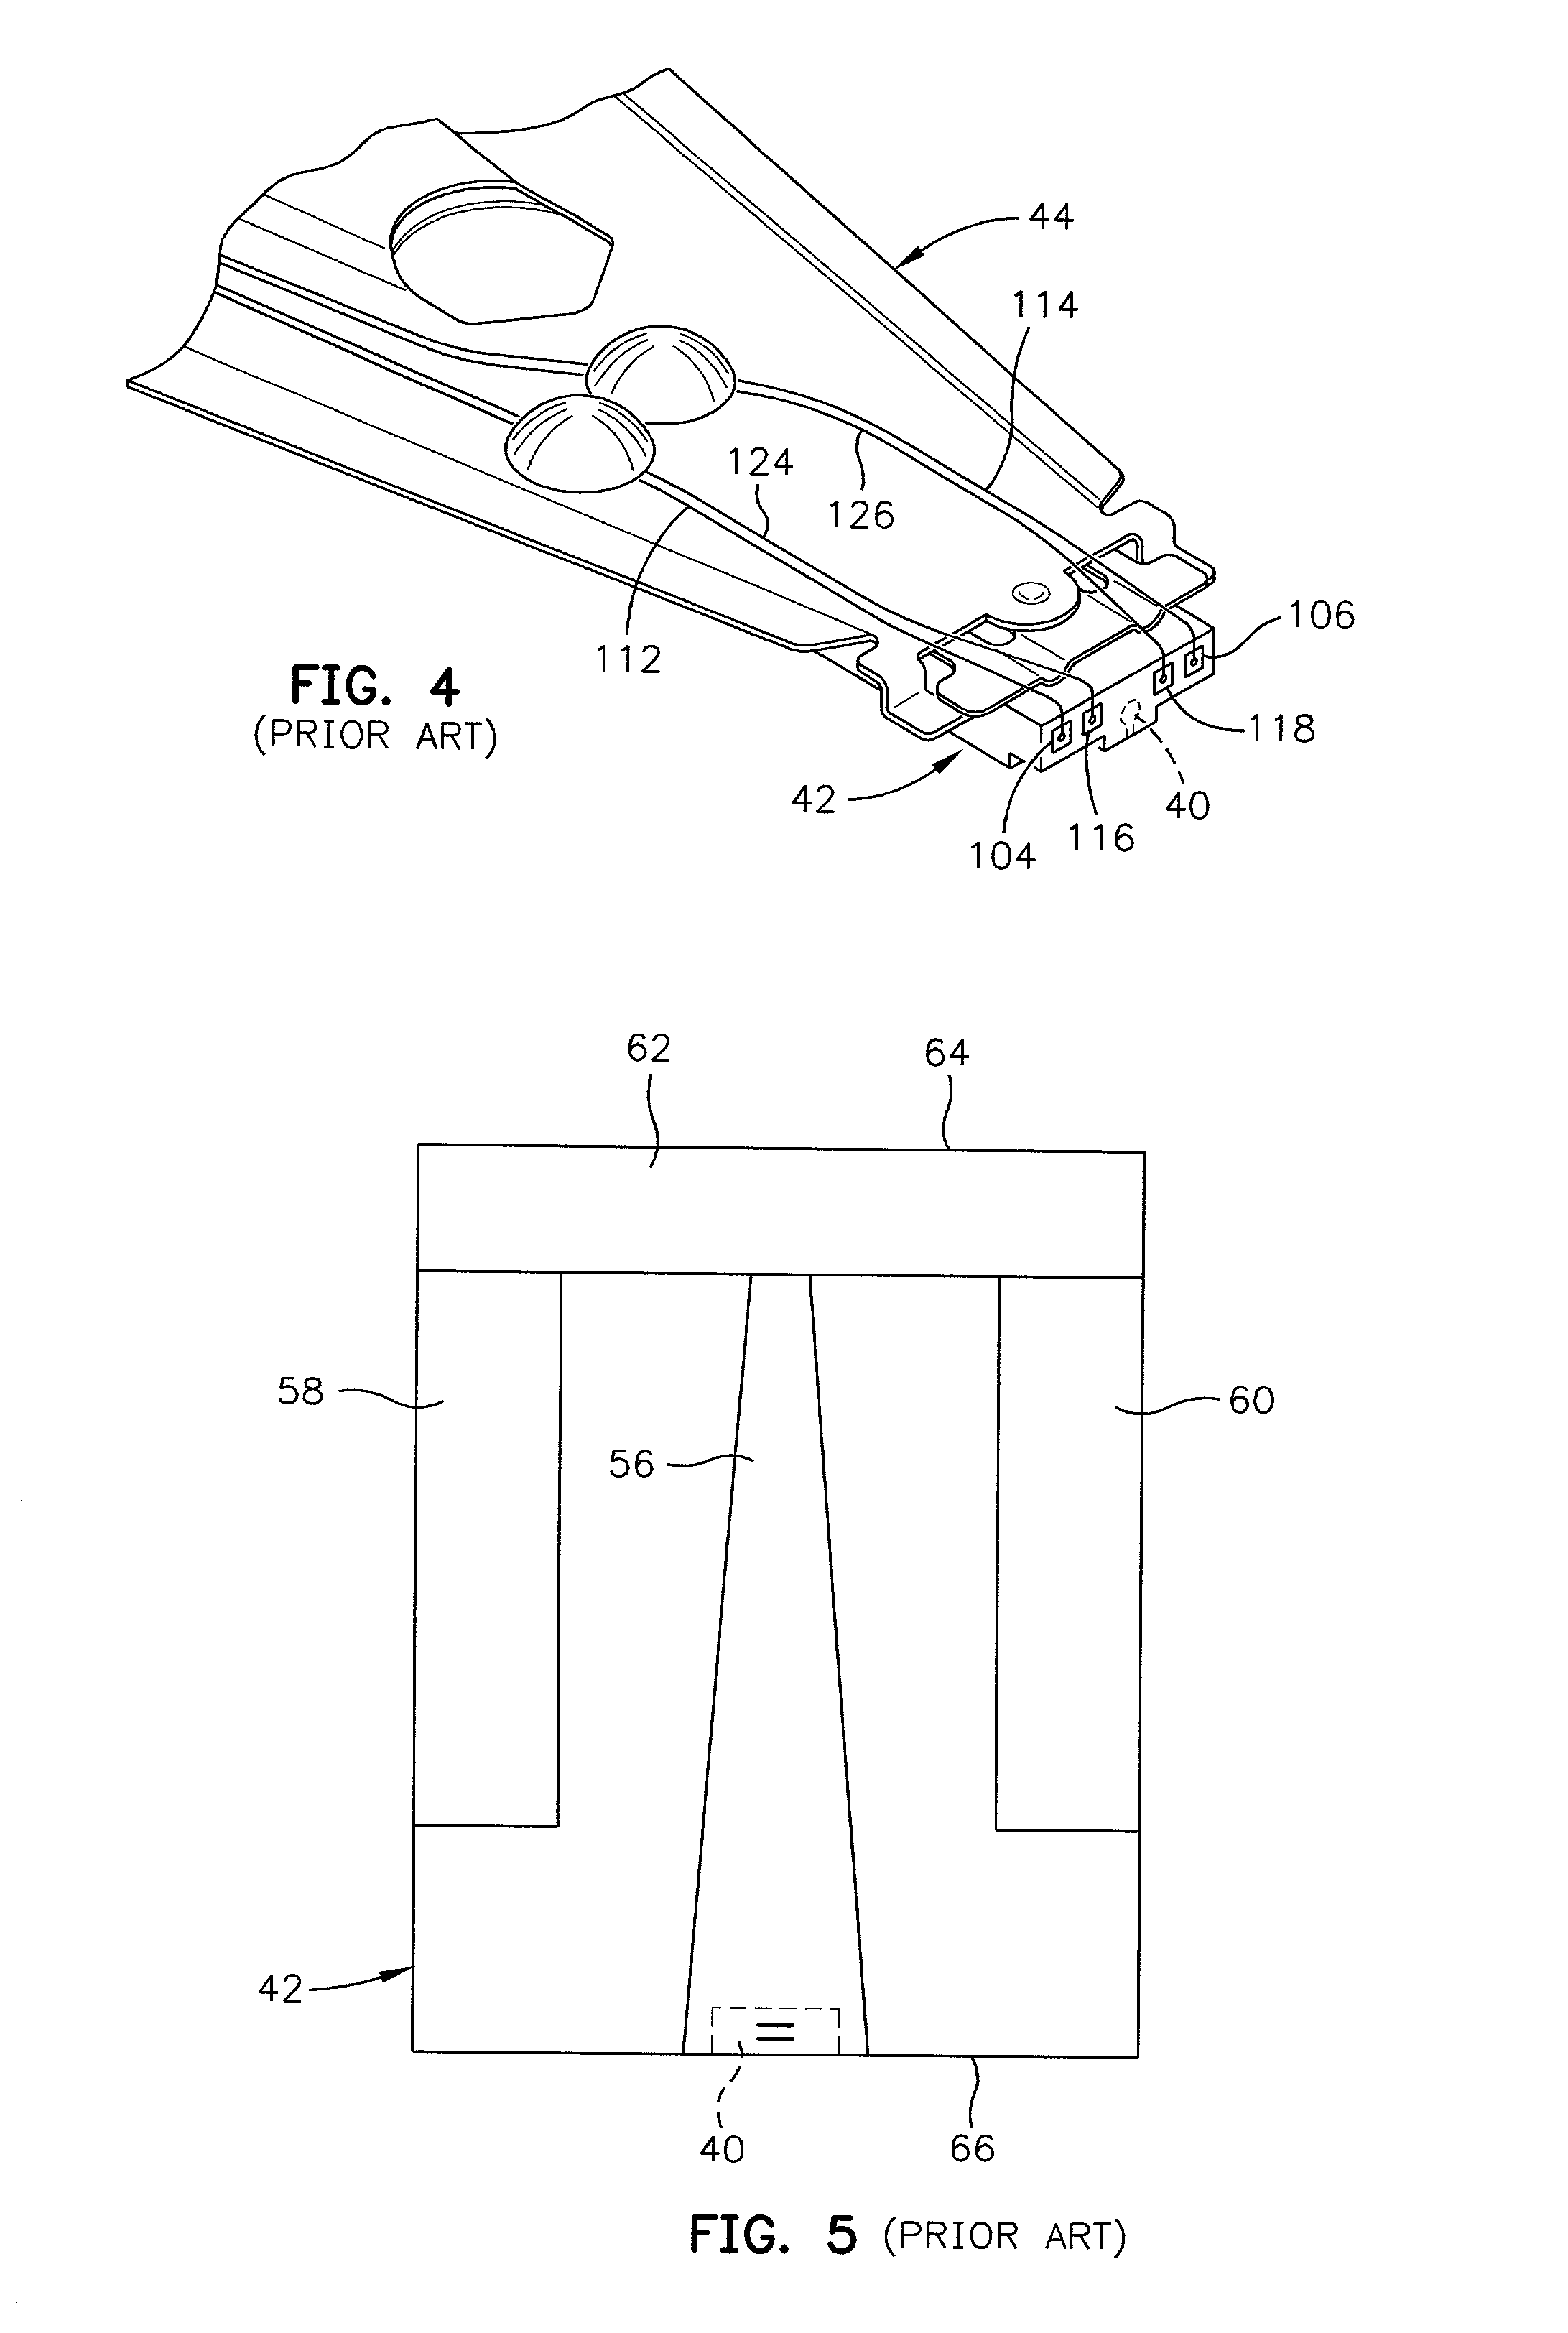 Spin valve sensor with in-stack biased free layer and antiparallel (AP) pinned layer pinned without a pinning layer